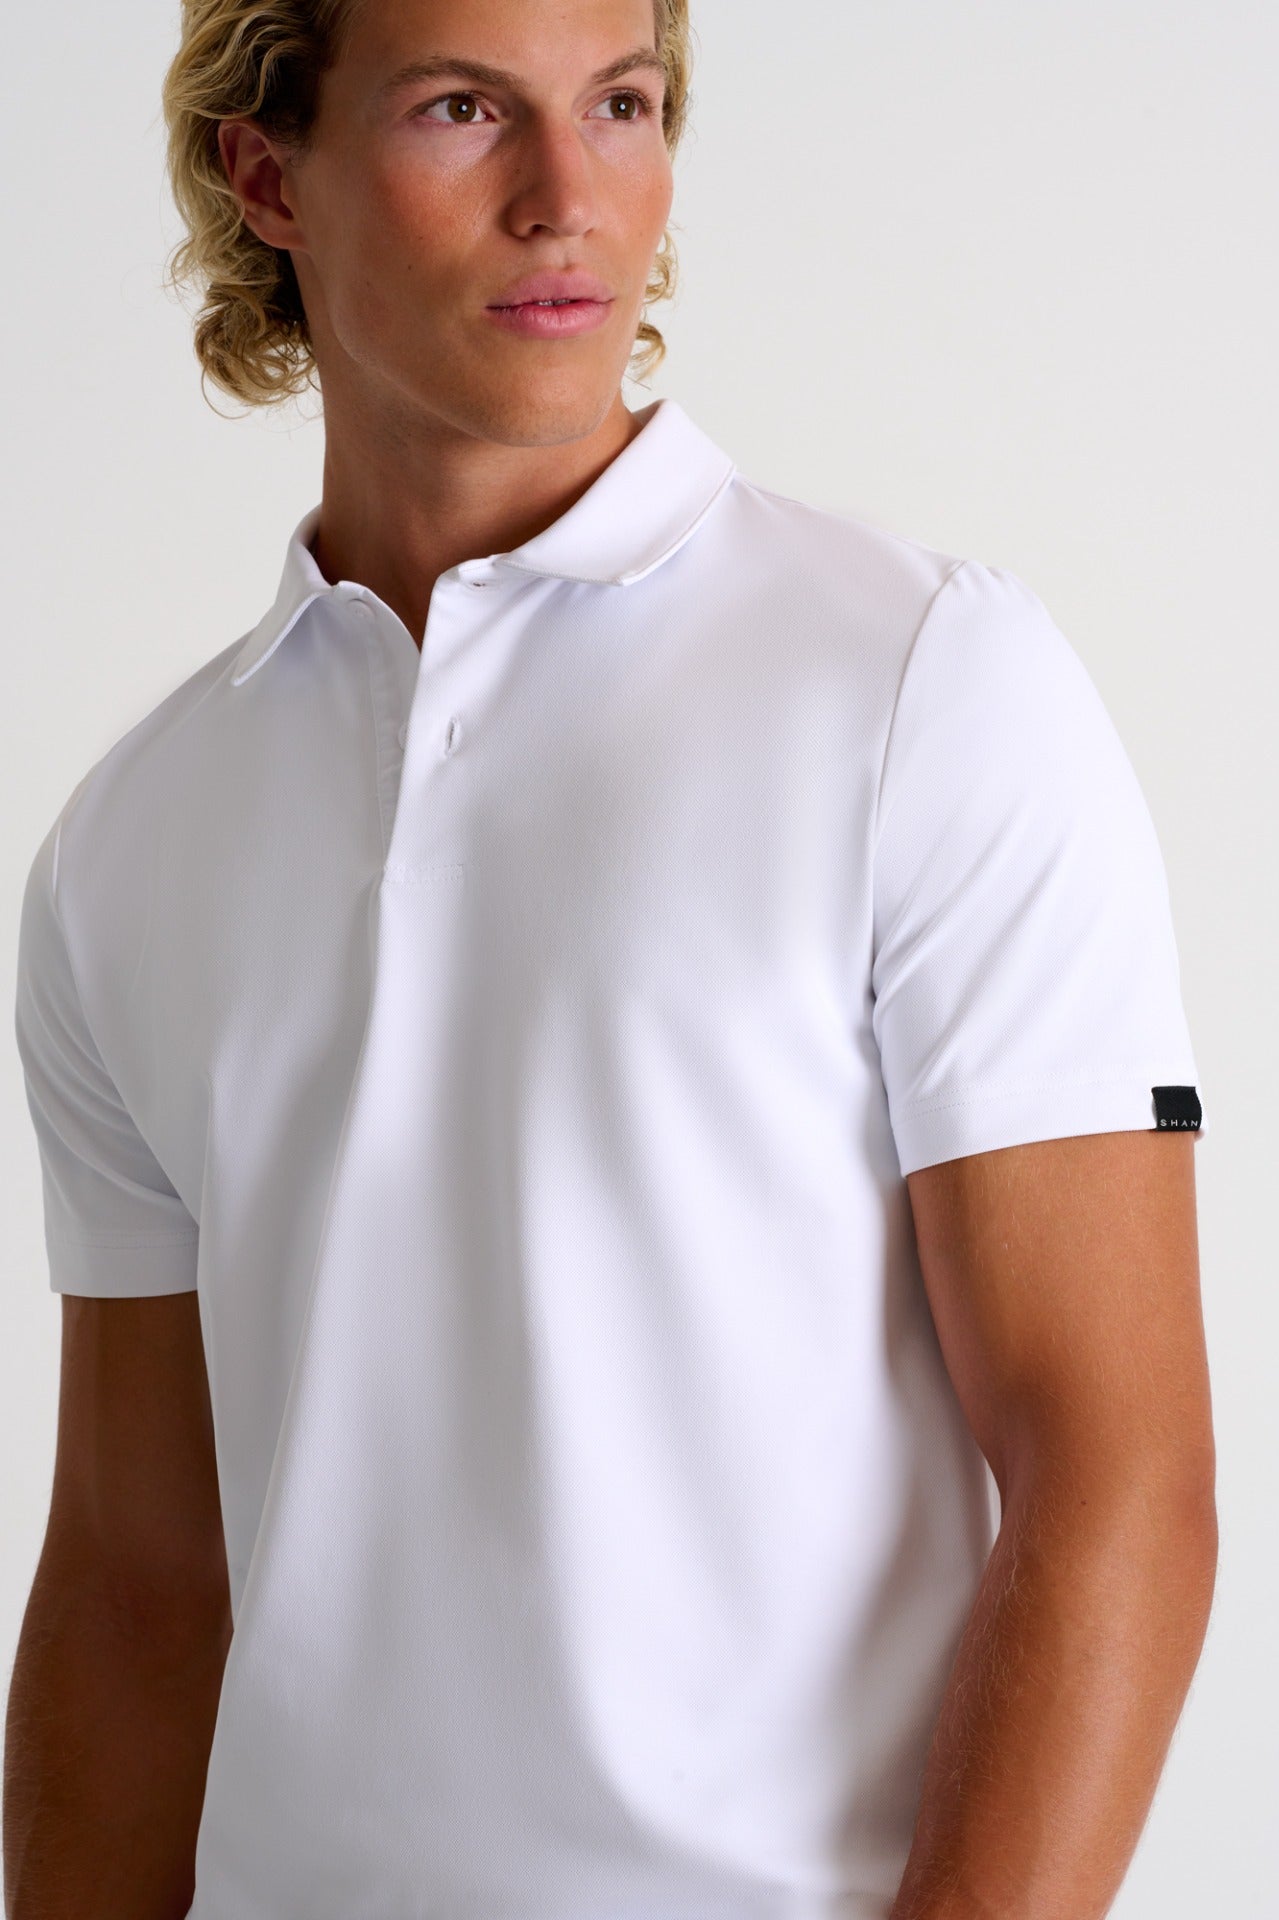 62213-47-000 - Textured Jersey Polo S / 000 White